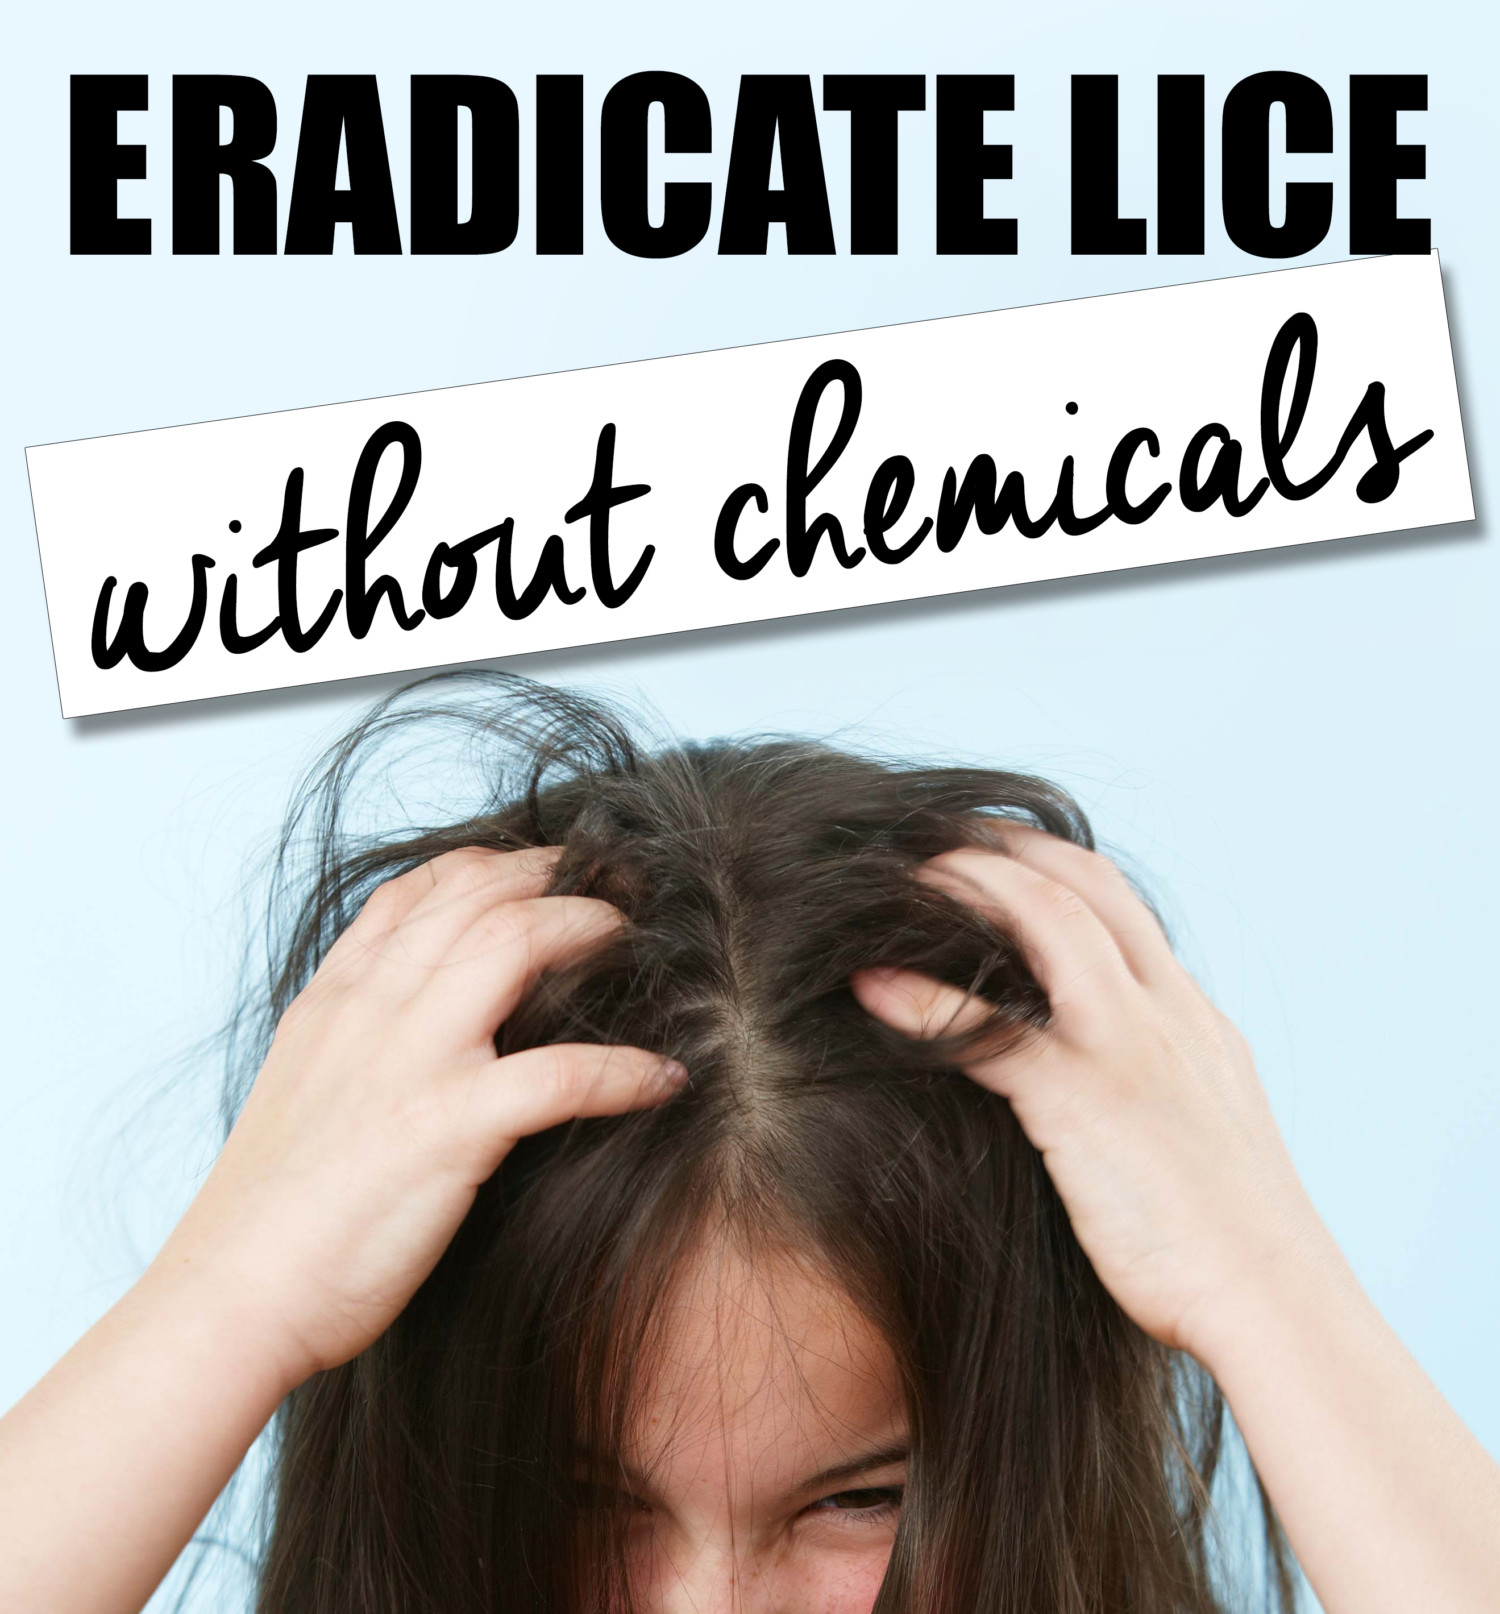 Effectively Get Rid of Super Lice Without Chemicals - Life She Has